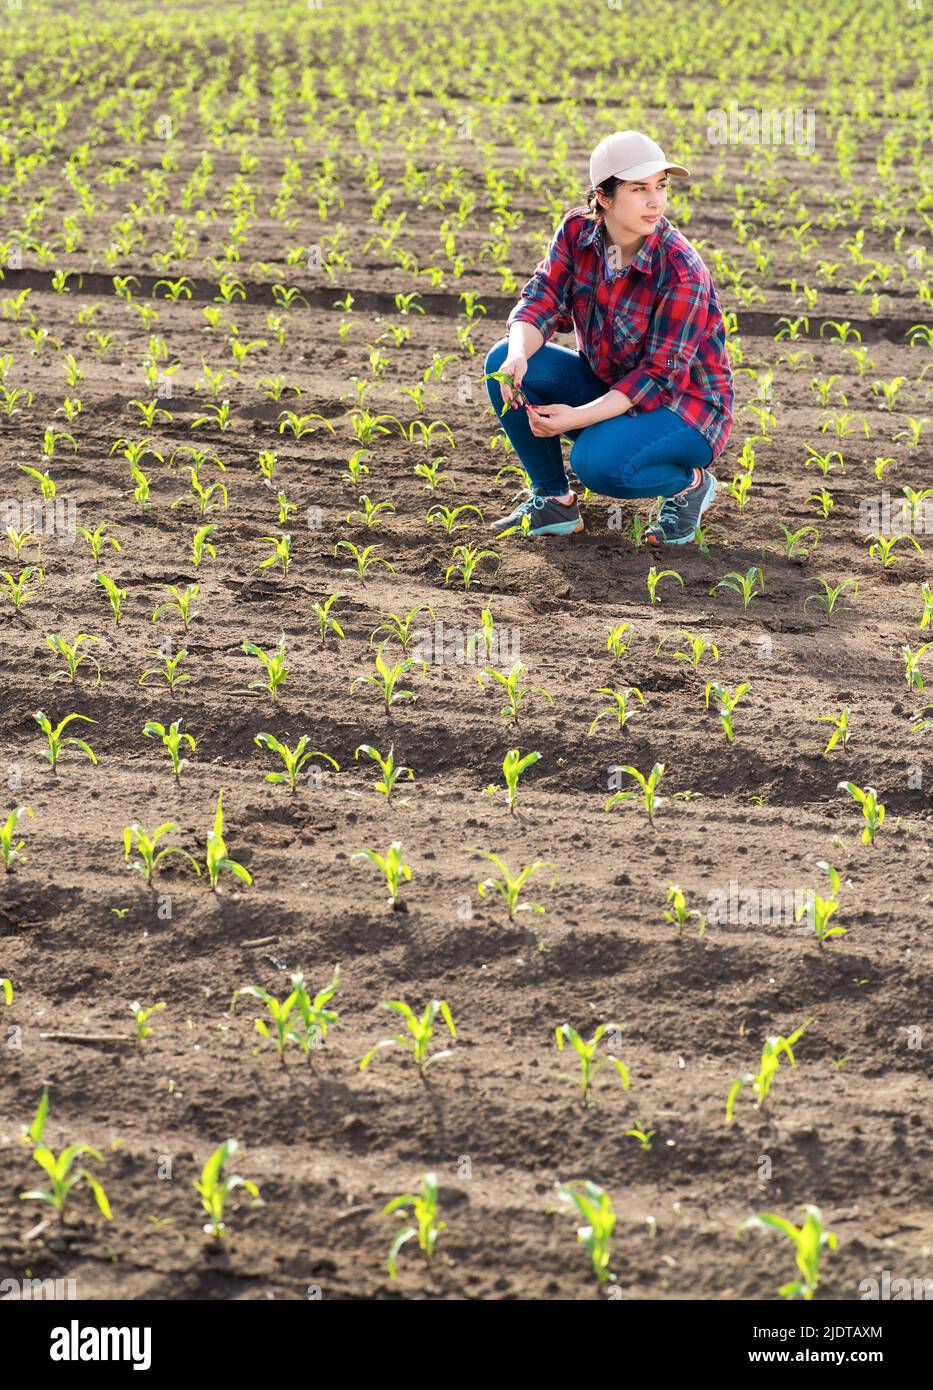 Farmer examining corn plant in field. Agricultural activity at cultivated land. Stock Photo